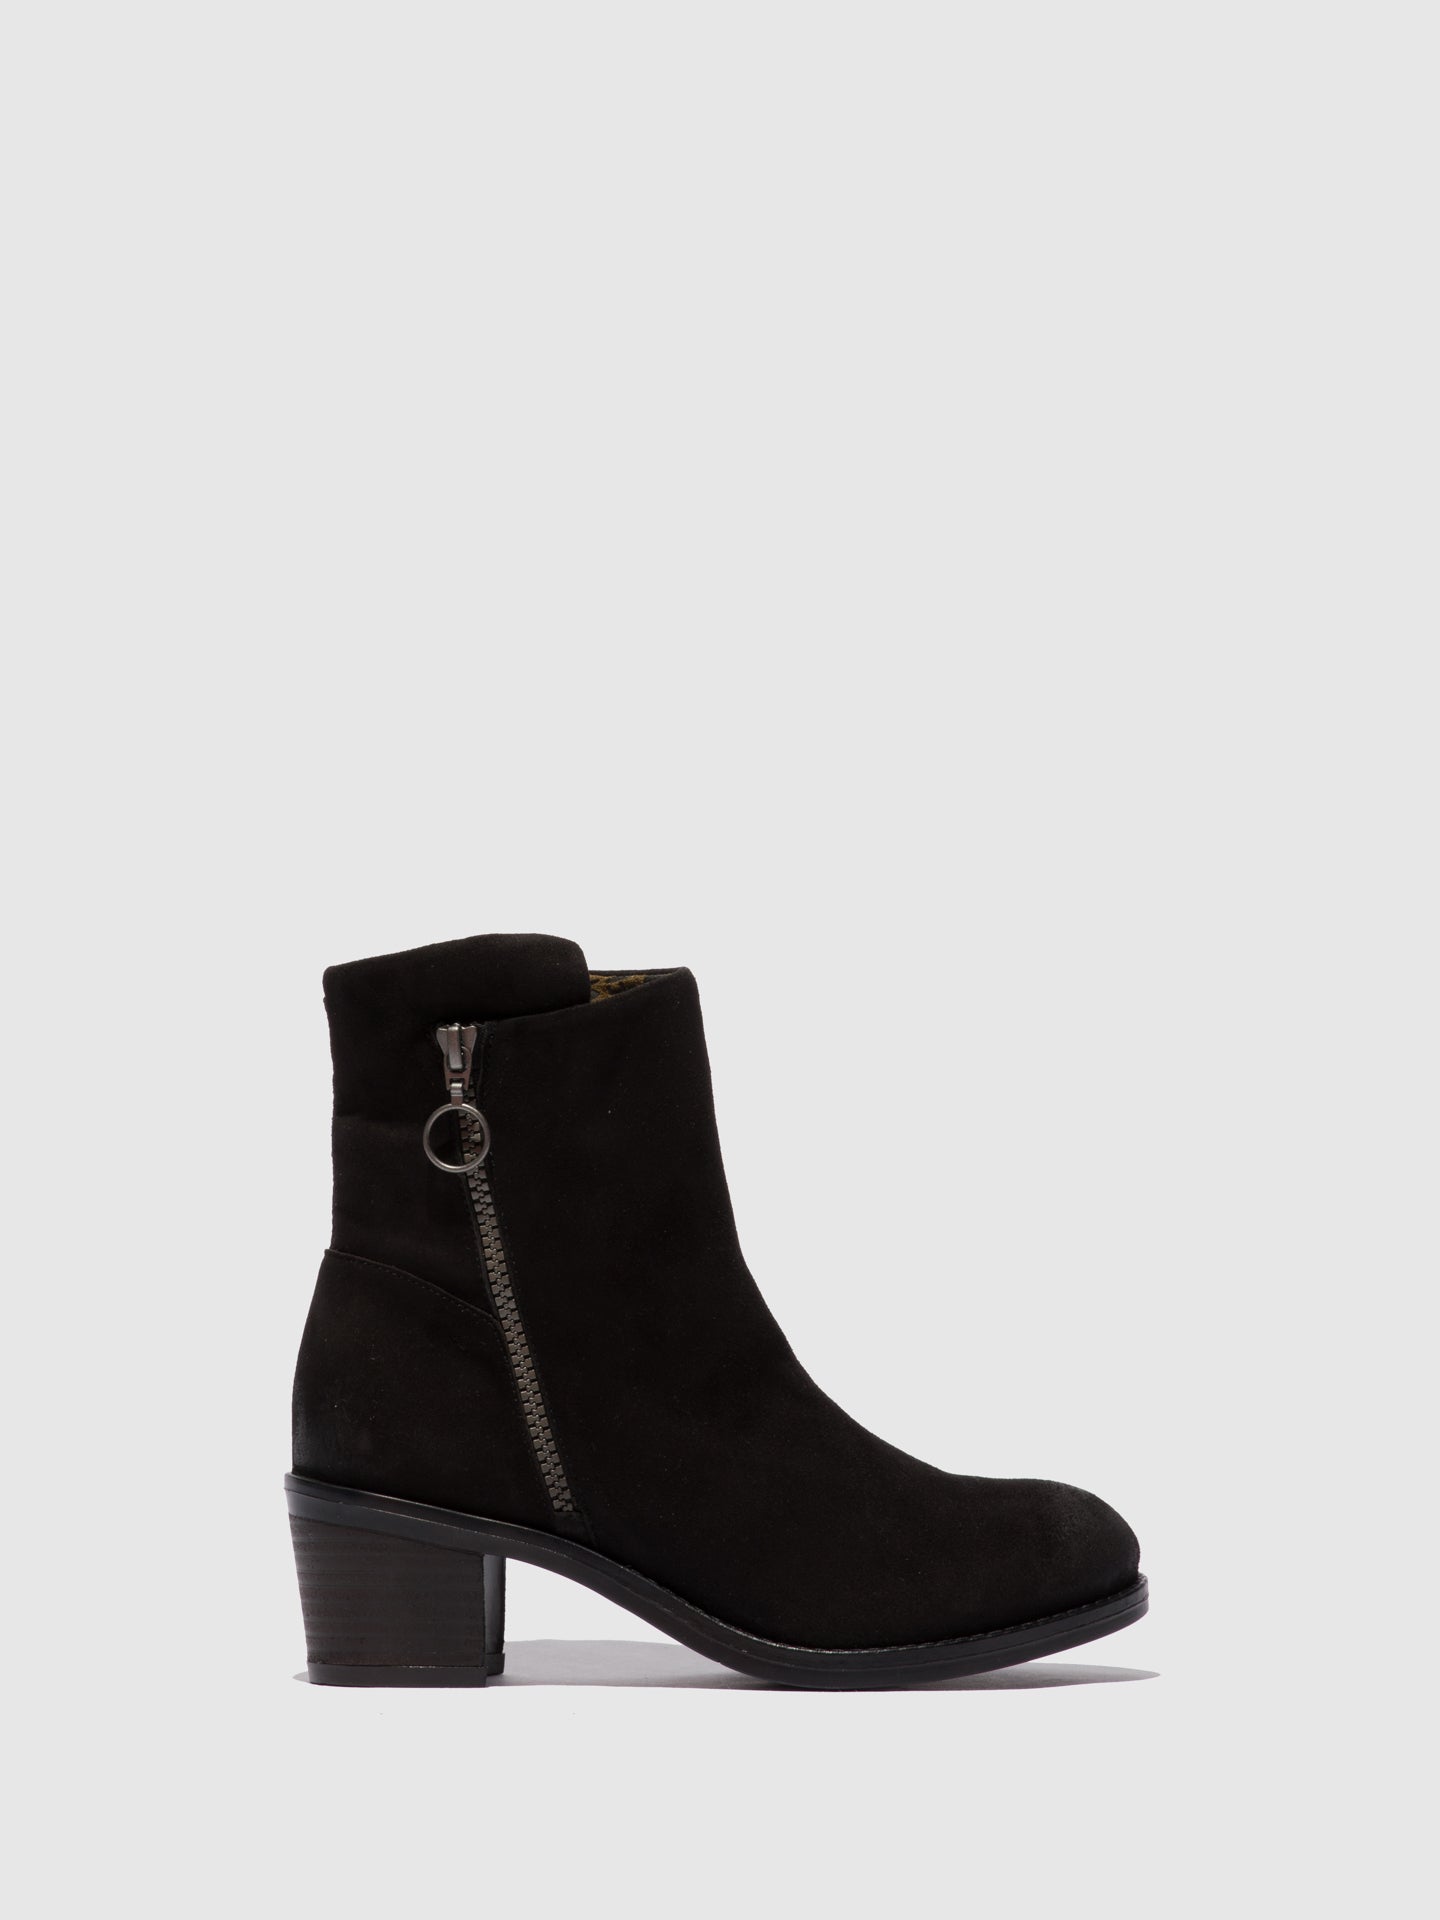 Fly London Zip Up Ankle Boots ZENT483FLY SILKY BLACK